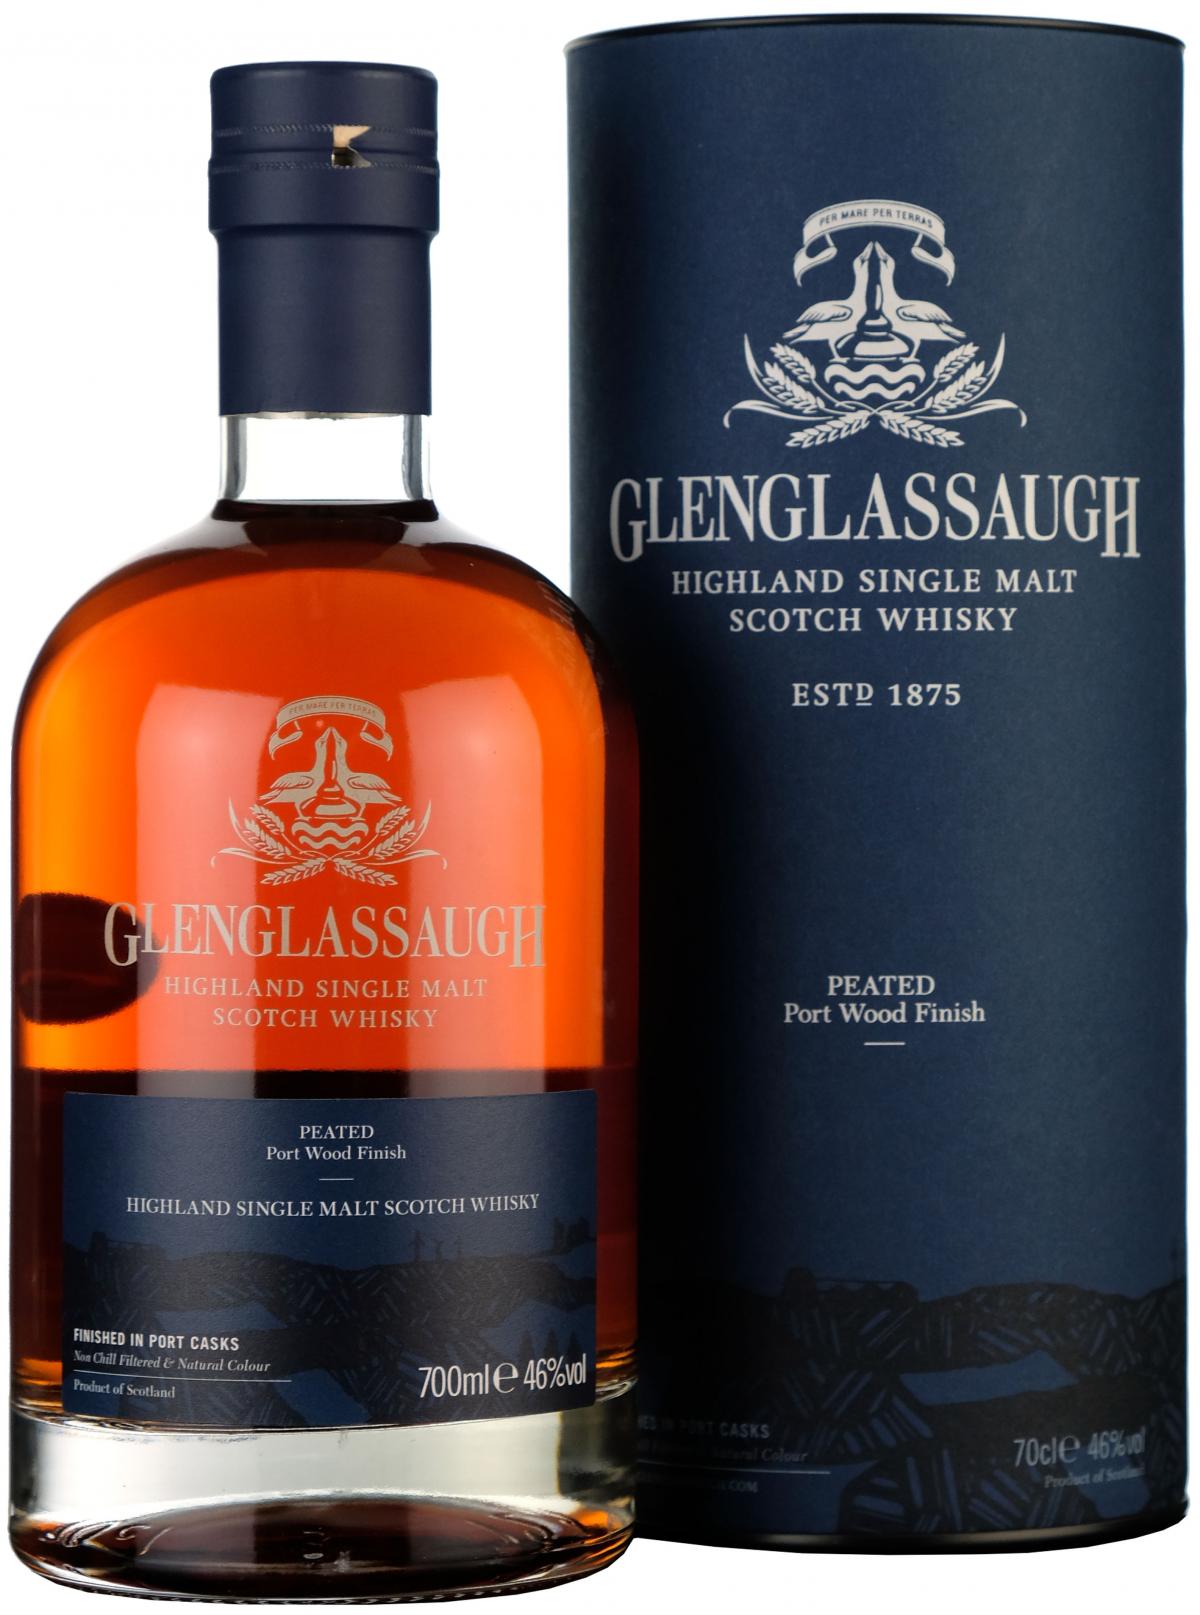 glenglassaugh finished in peated port wood casks